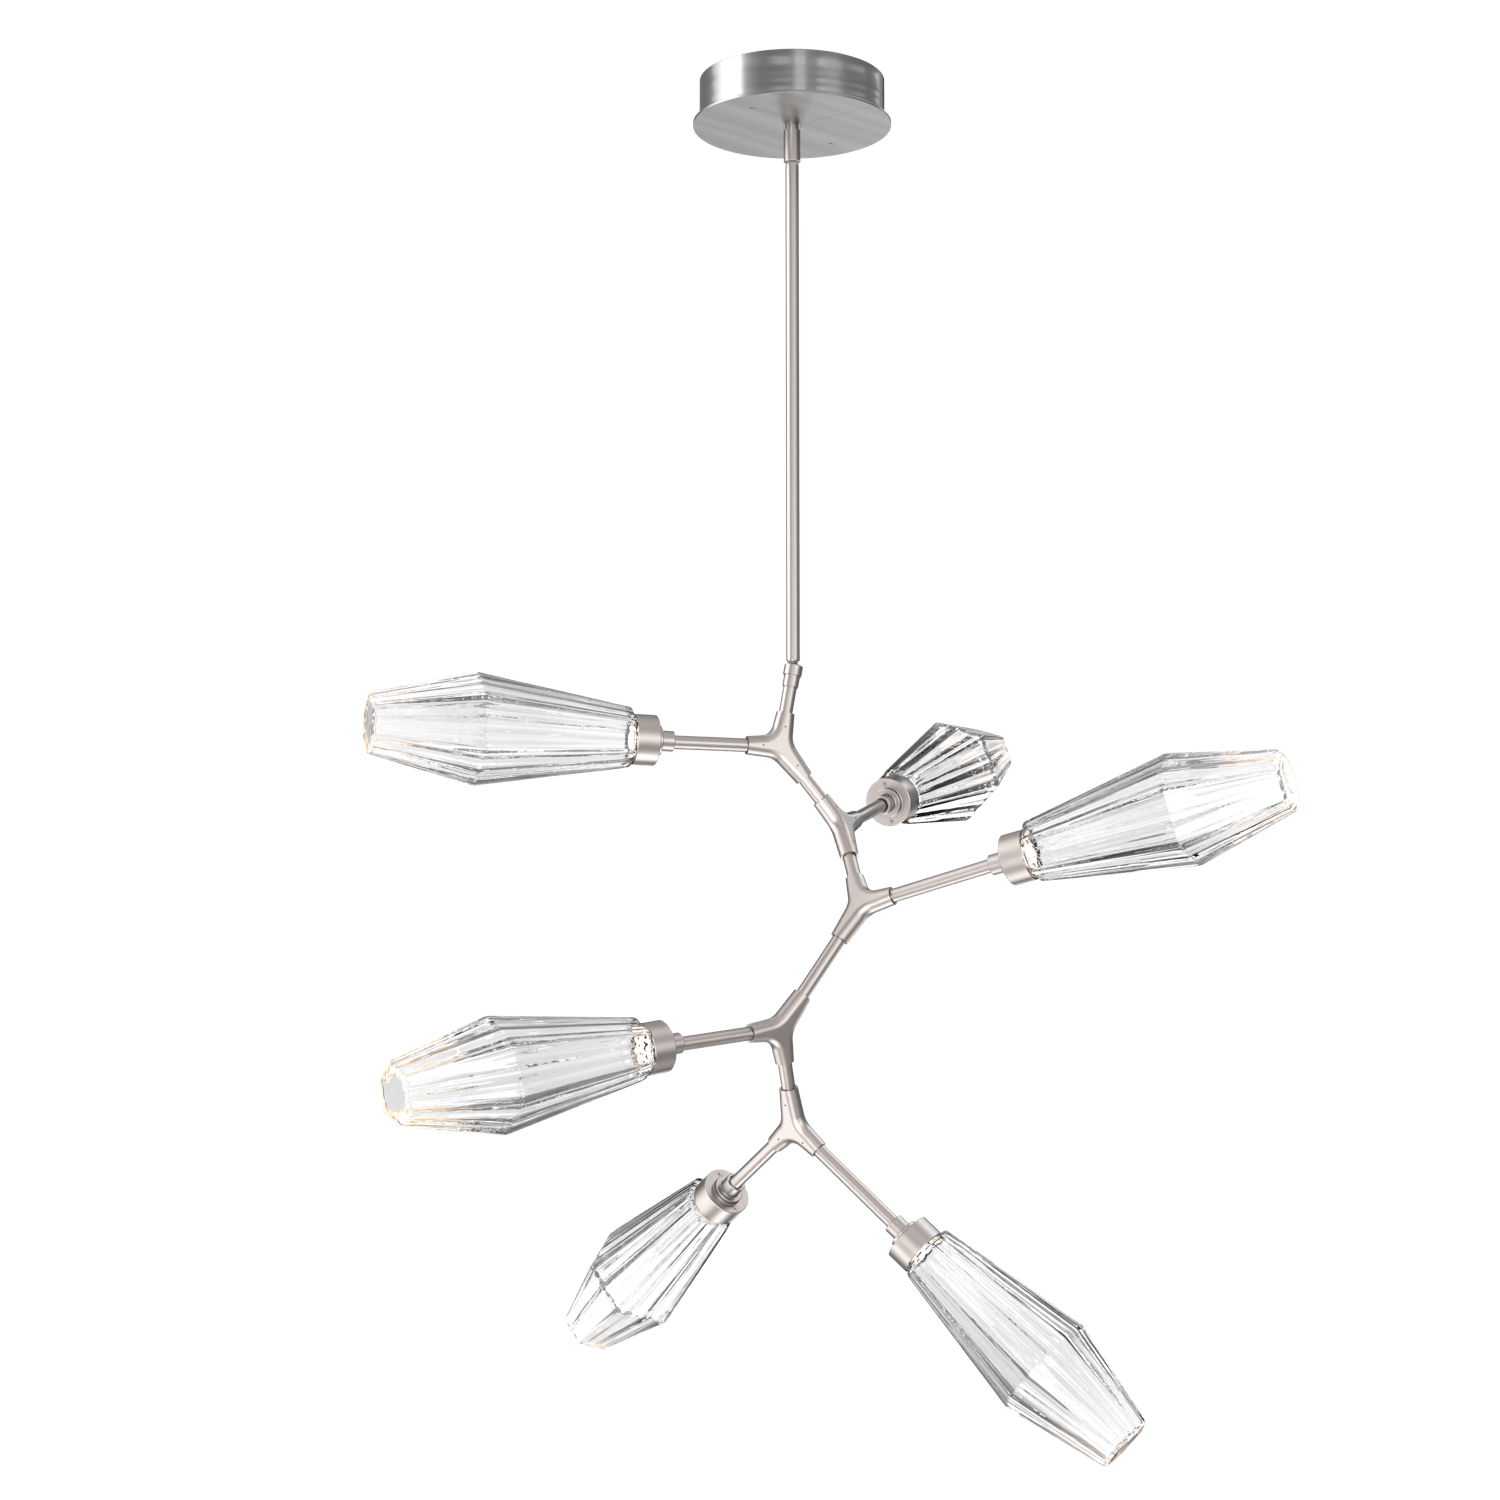 CHB0049-VA-SN-RC-Hammerton-Studio-Aalto-6-light-modern-vine-chandelier-with-satin-nickel-finish-and-optic-ribbed-clear-glass-shades-and-LED-lamping